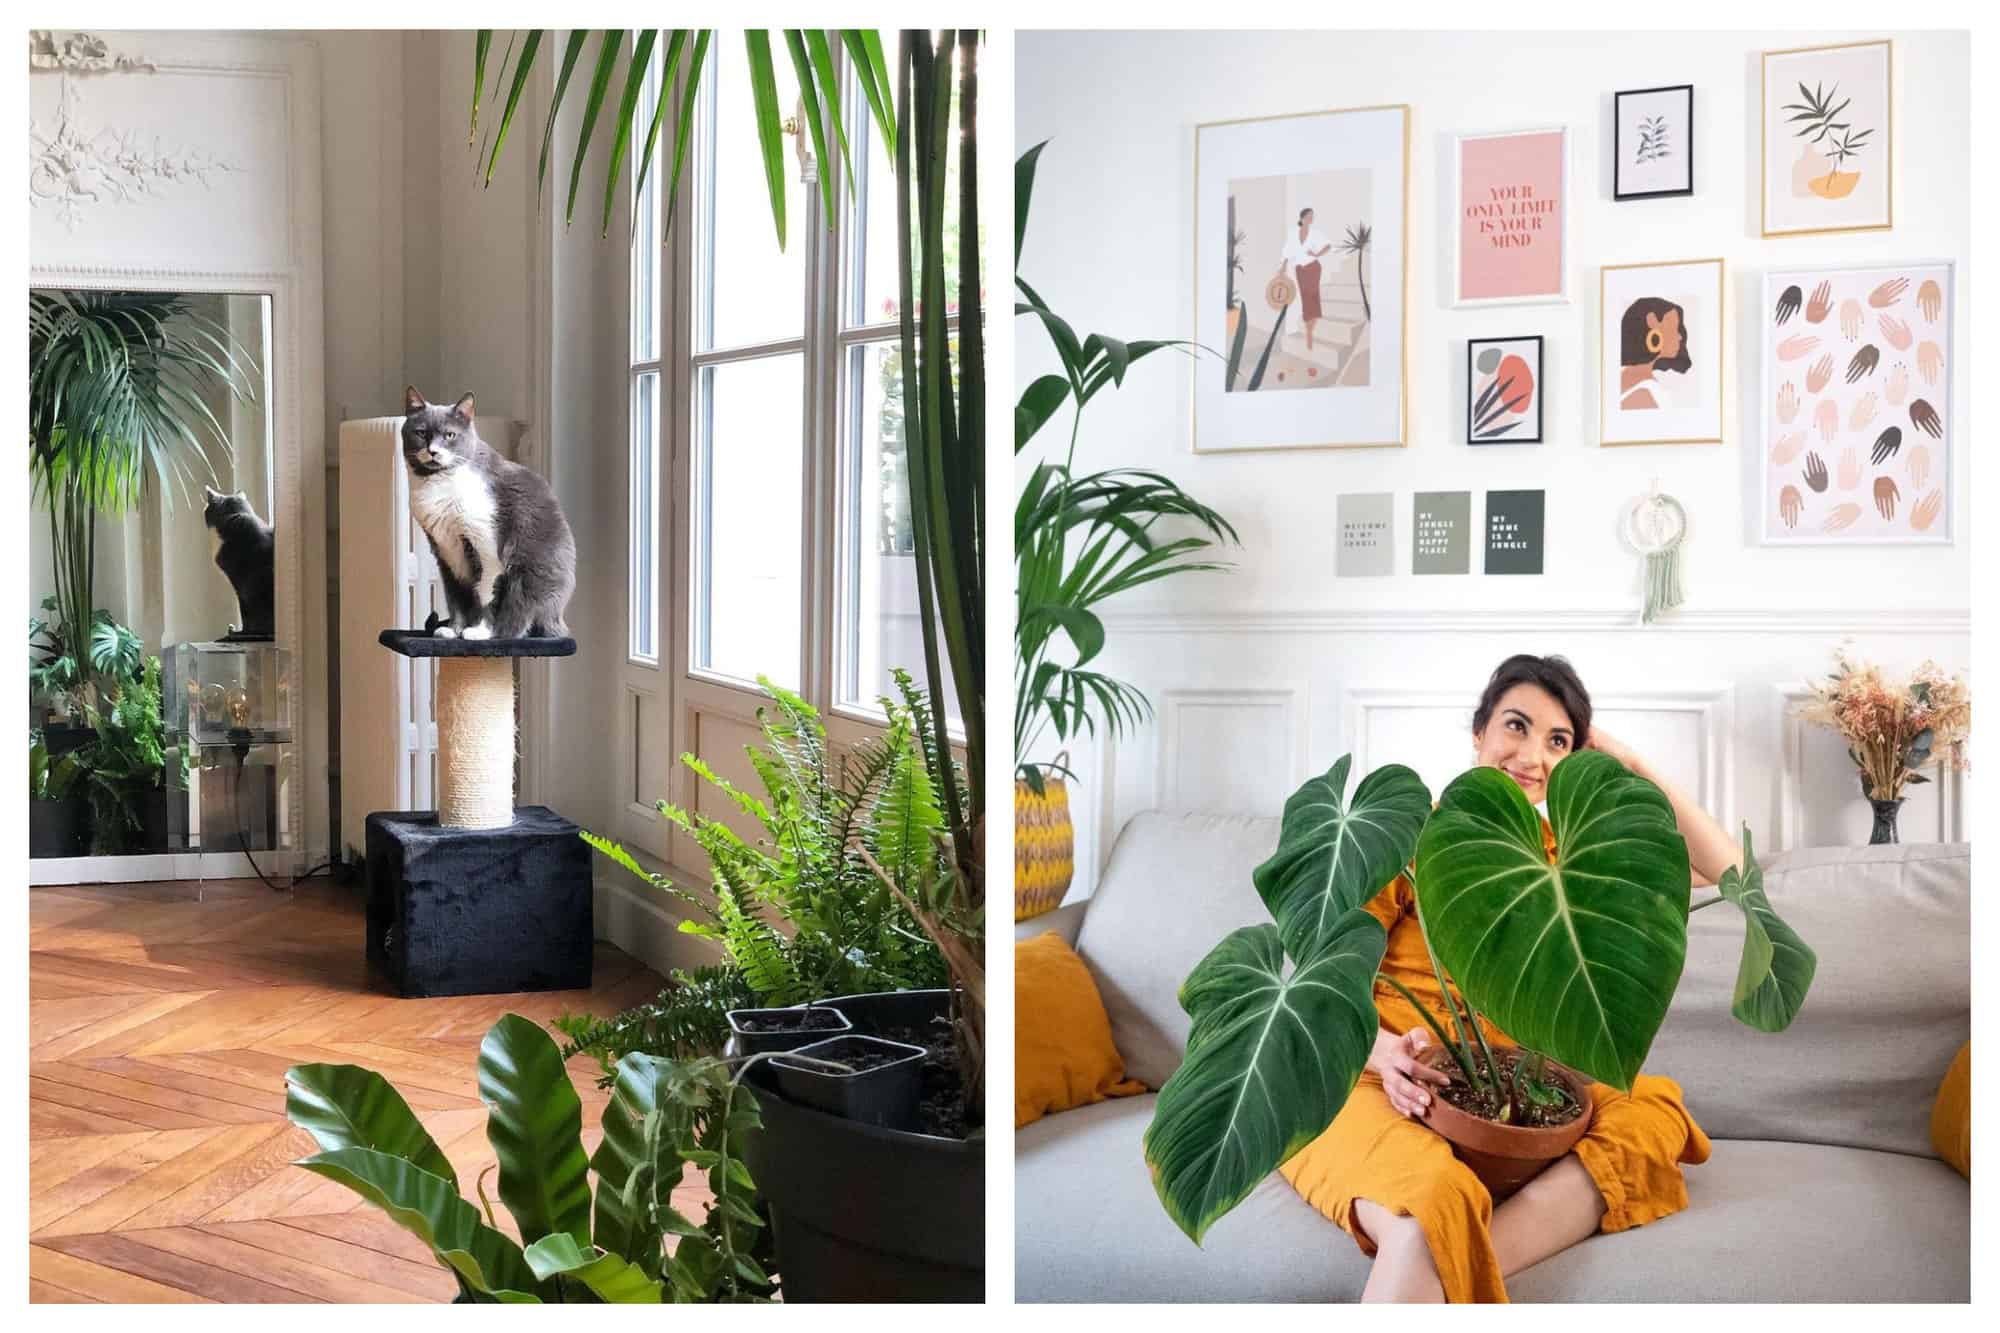 Left: A gray and white European breed cat is sitting in his cat tower with scratcher in the midst of houseplants. This photo is taken in a Parisian apartment on the ground floor. The windows open to an outdoor garden. Right: A picture of a french woman sitting in her gray couch with her Philodendron gloriosum plant. Her living room wall is beautifully decorated with feminine artworks. 